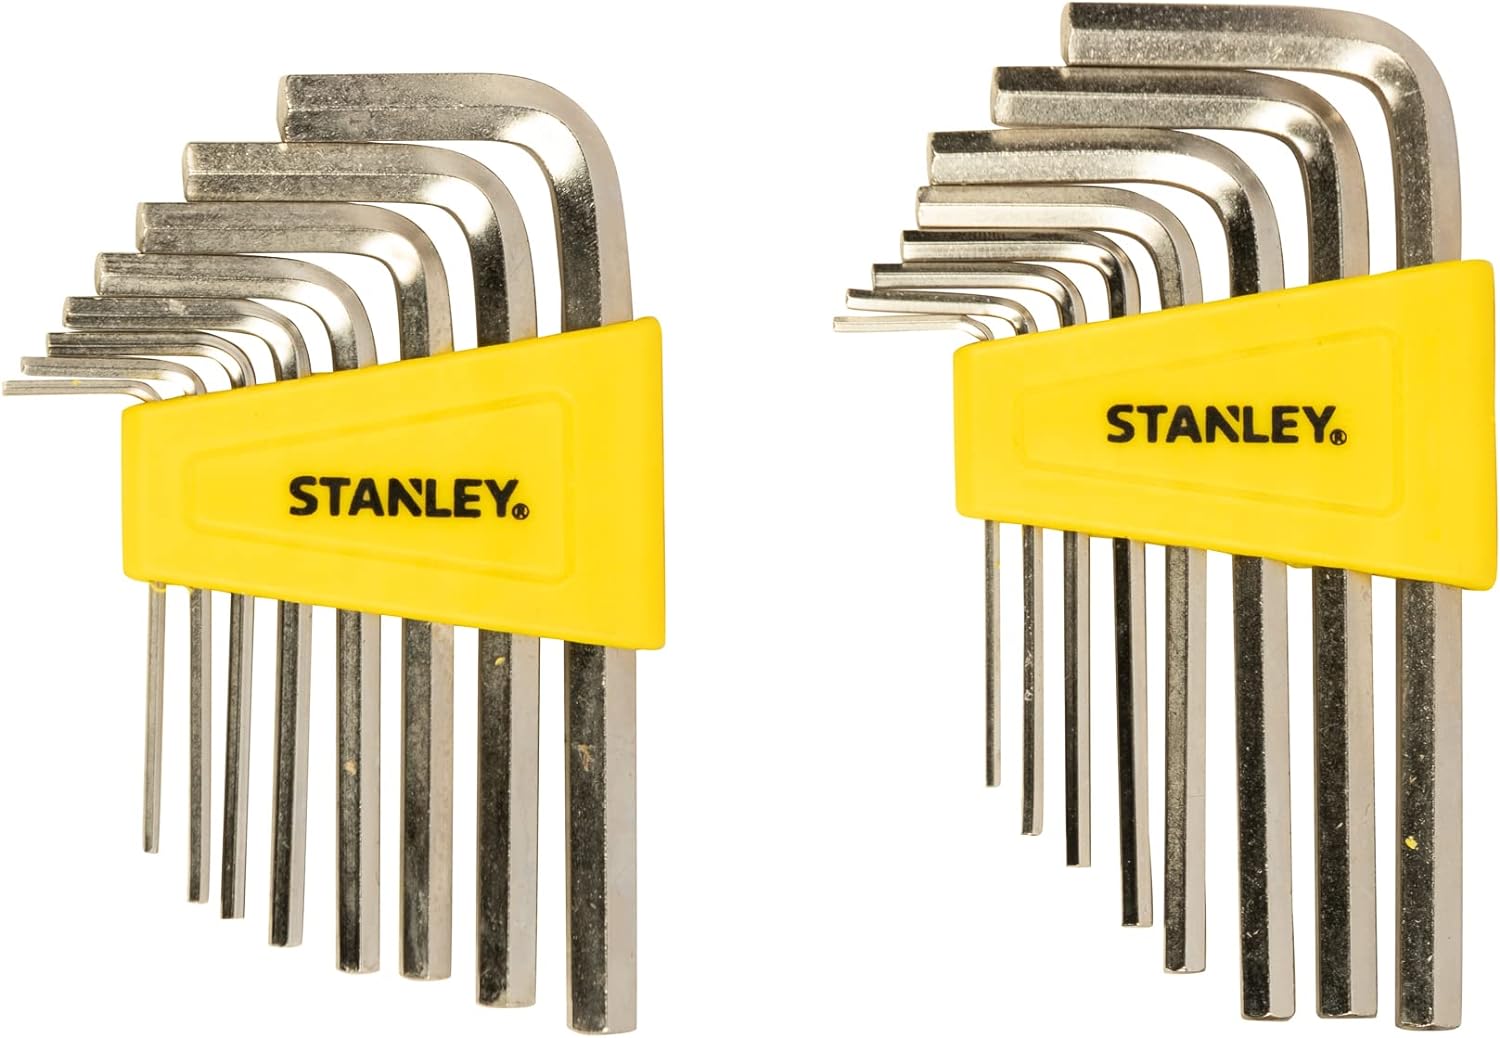 STANLEY Material Tool Set, 38 Pieces, Stmt0-74101